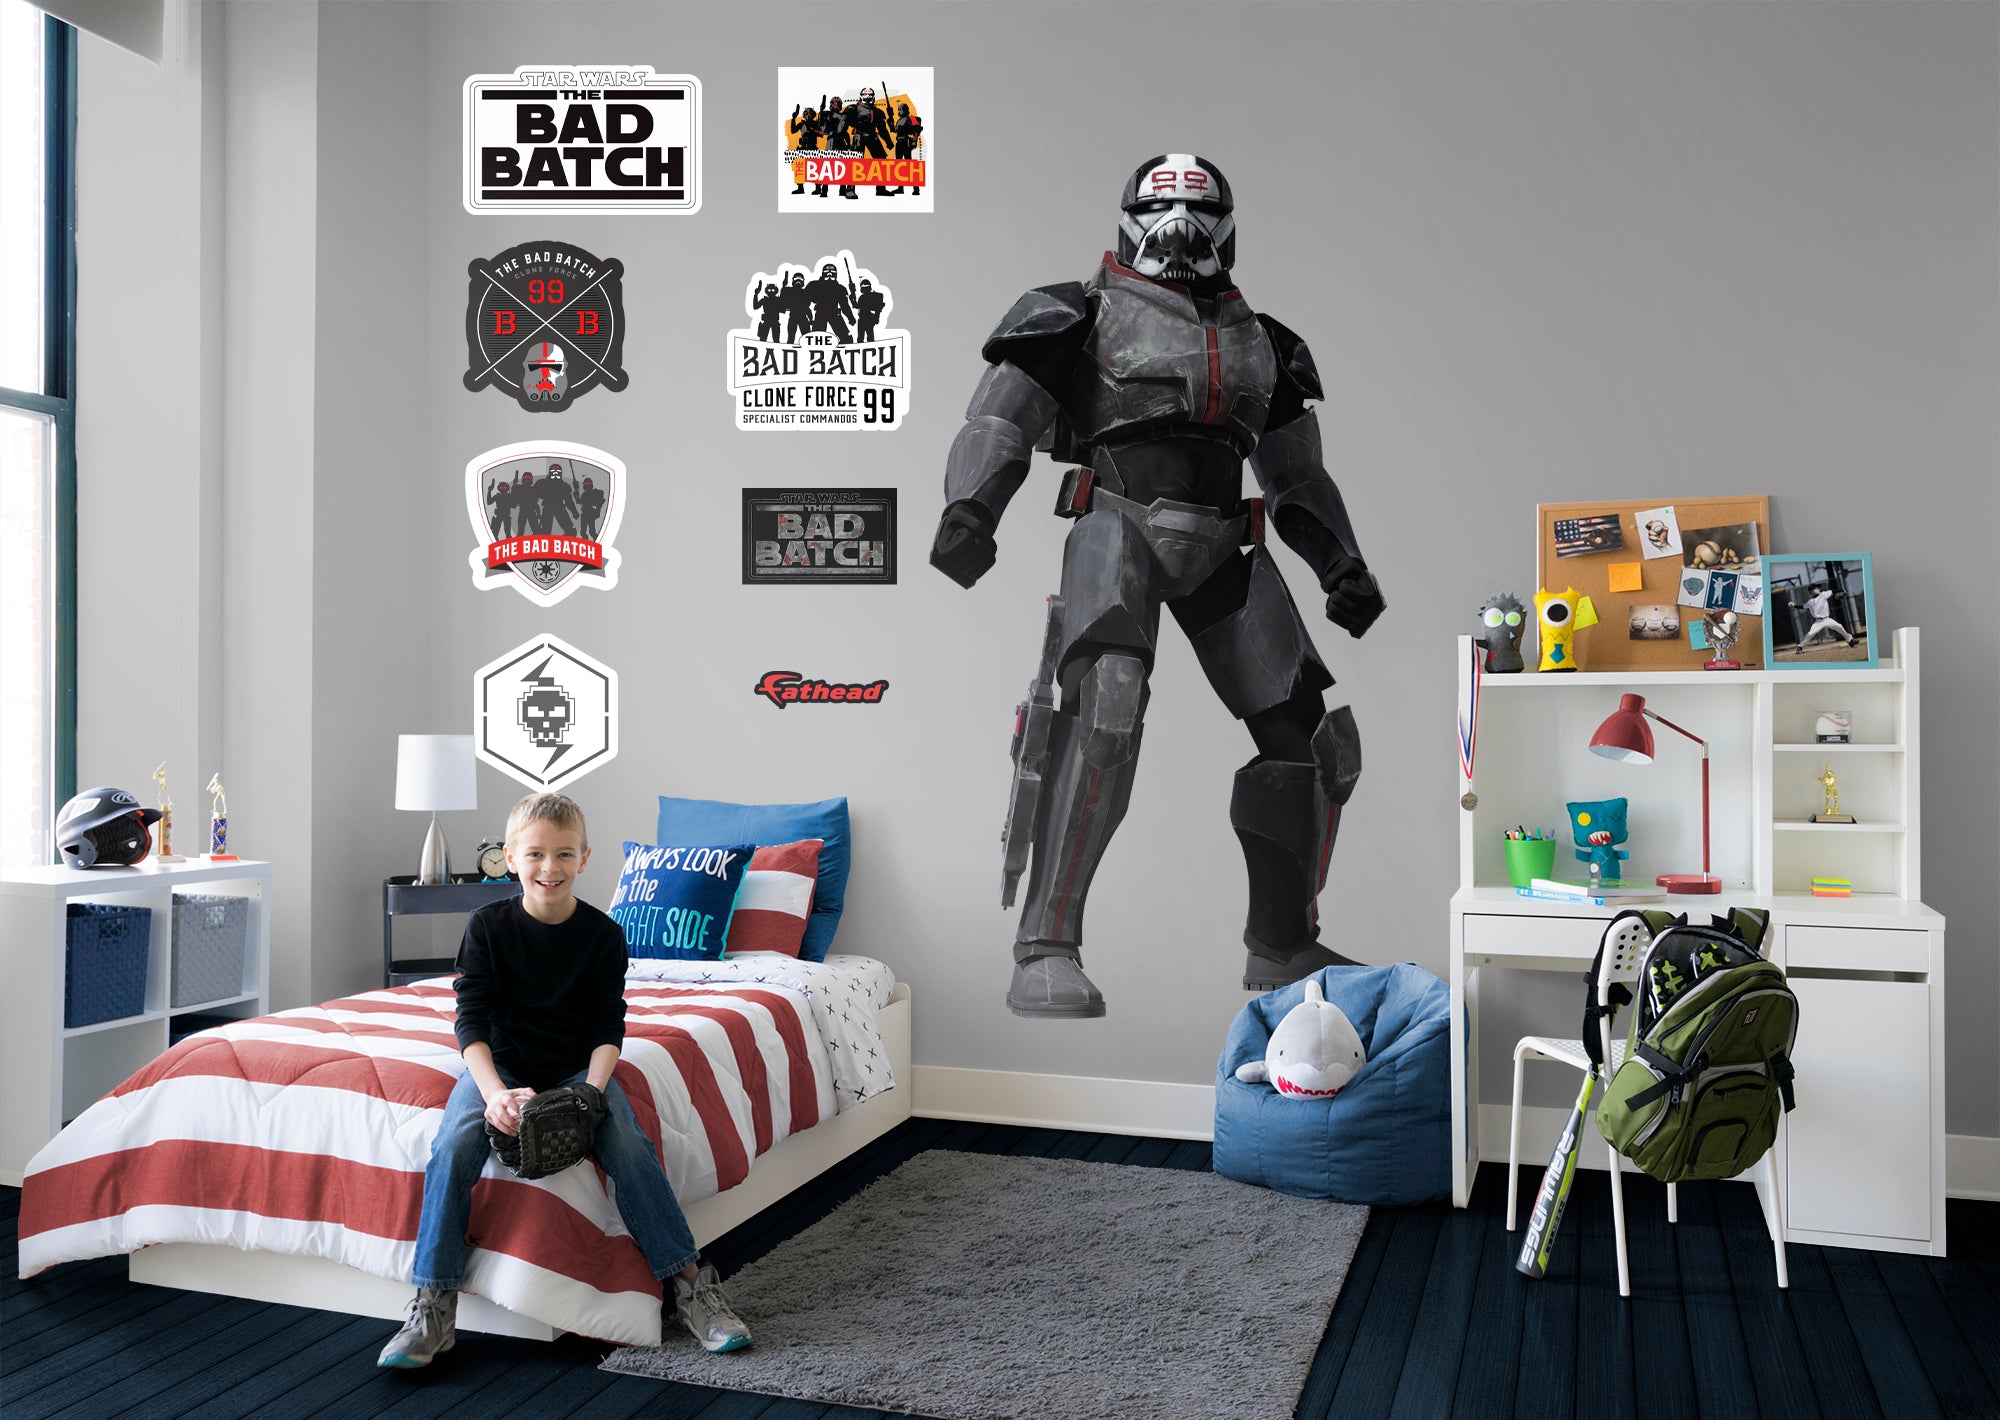 Bad Batch Wrecker - Officially Licensed Star Wars Removable Wall Decal Life-Size Character + 2 Decals by Fathead | Vinyl